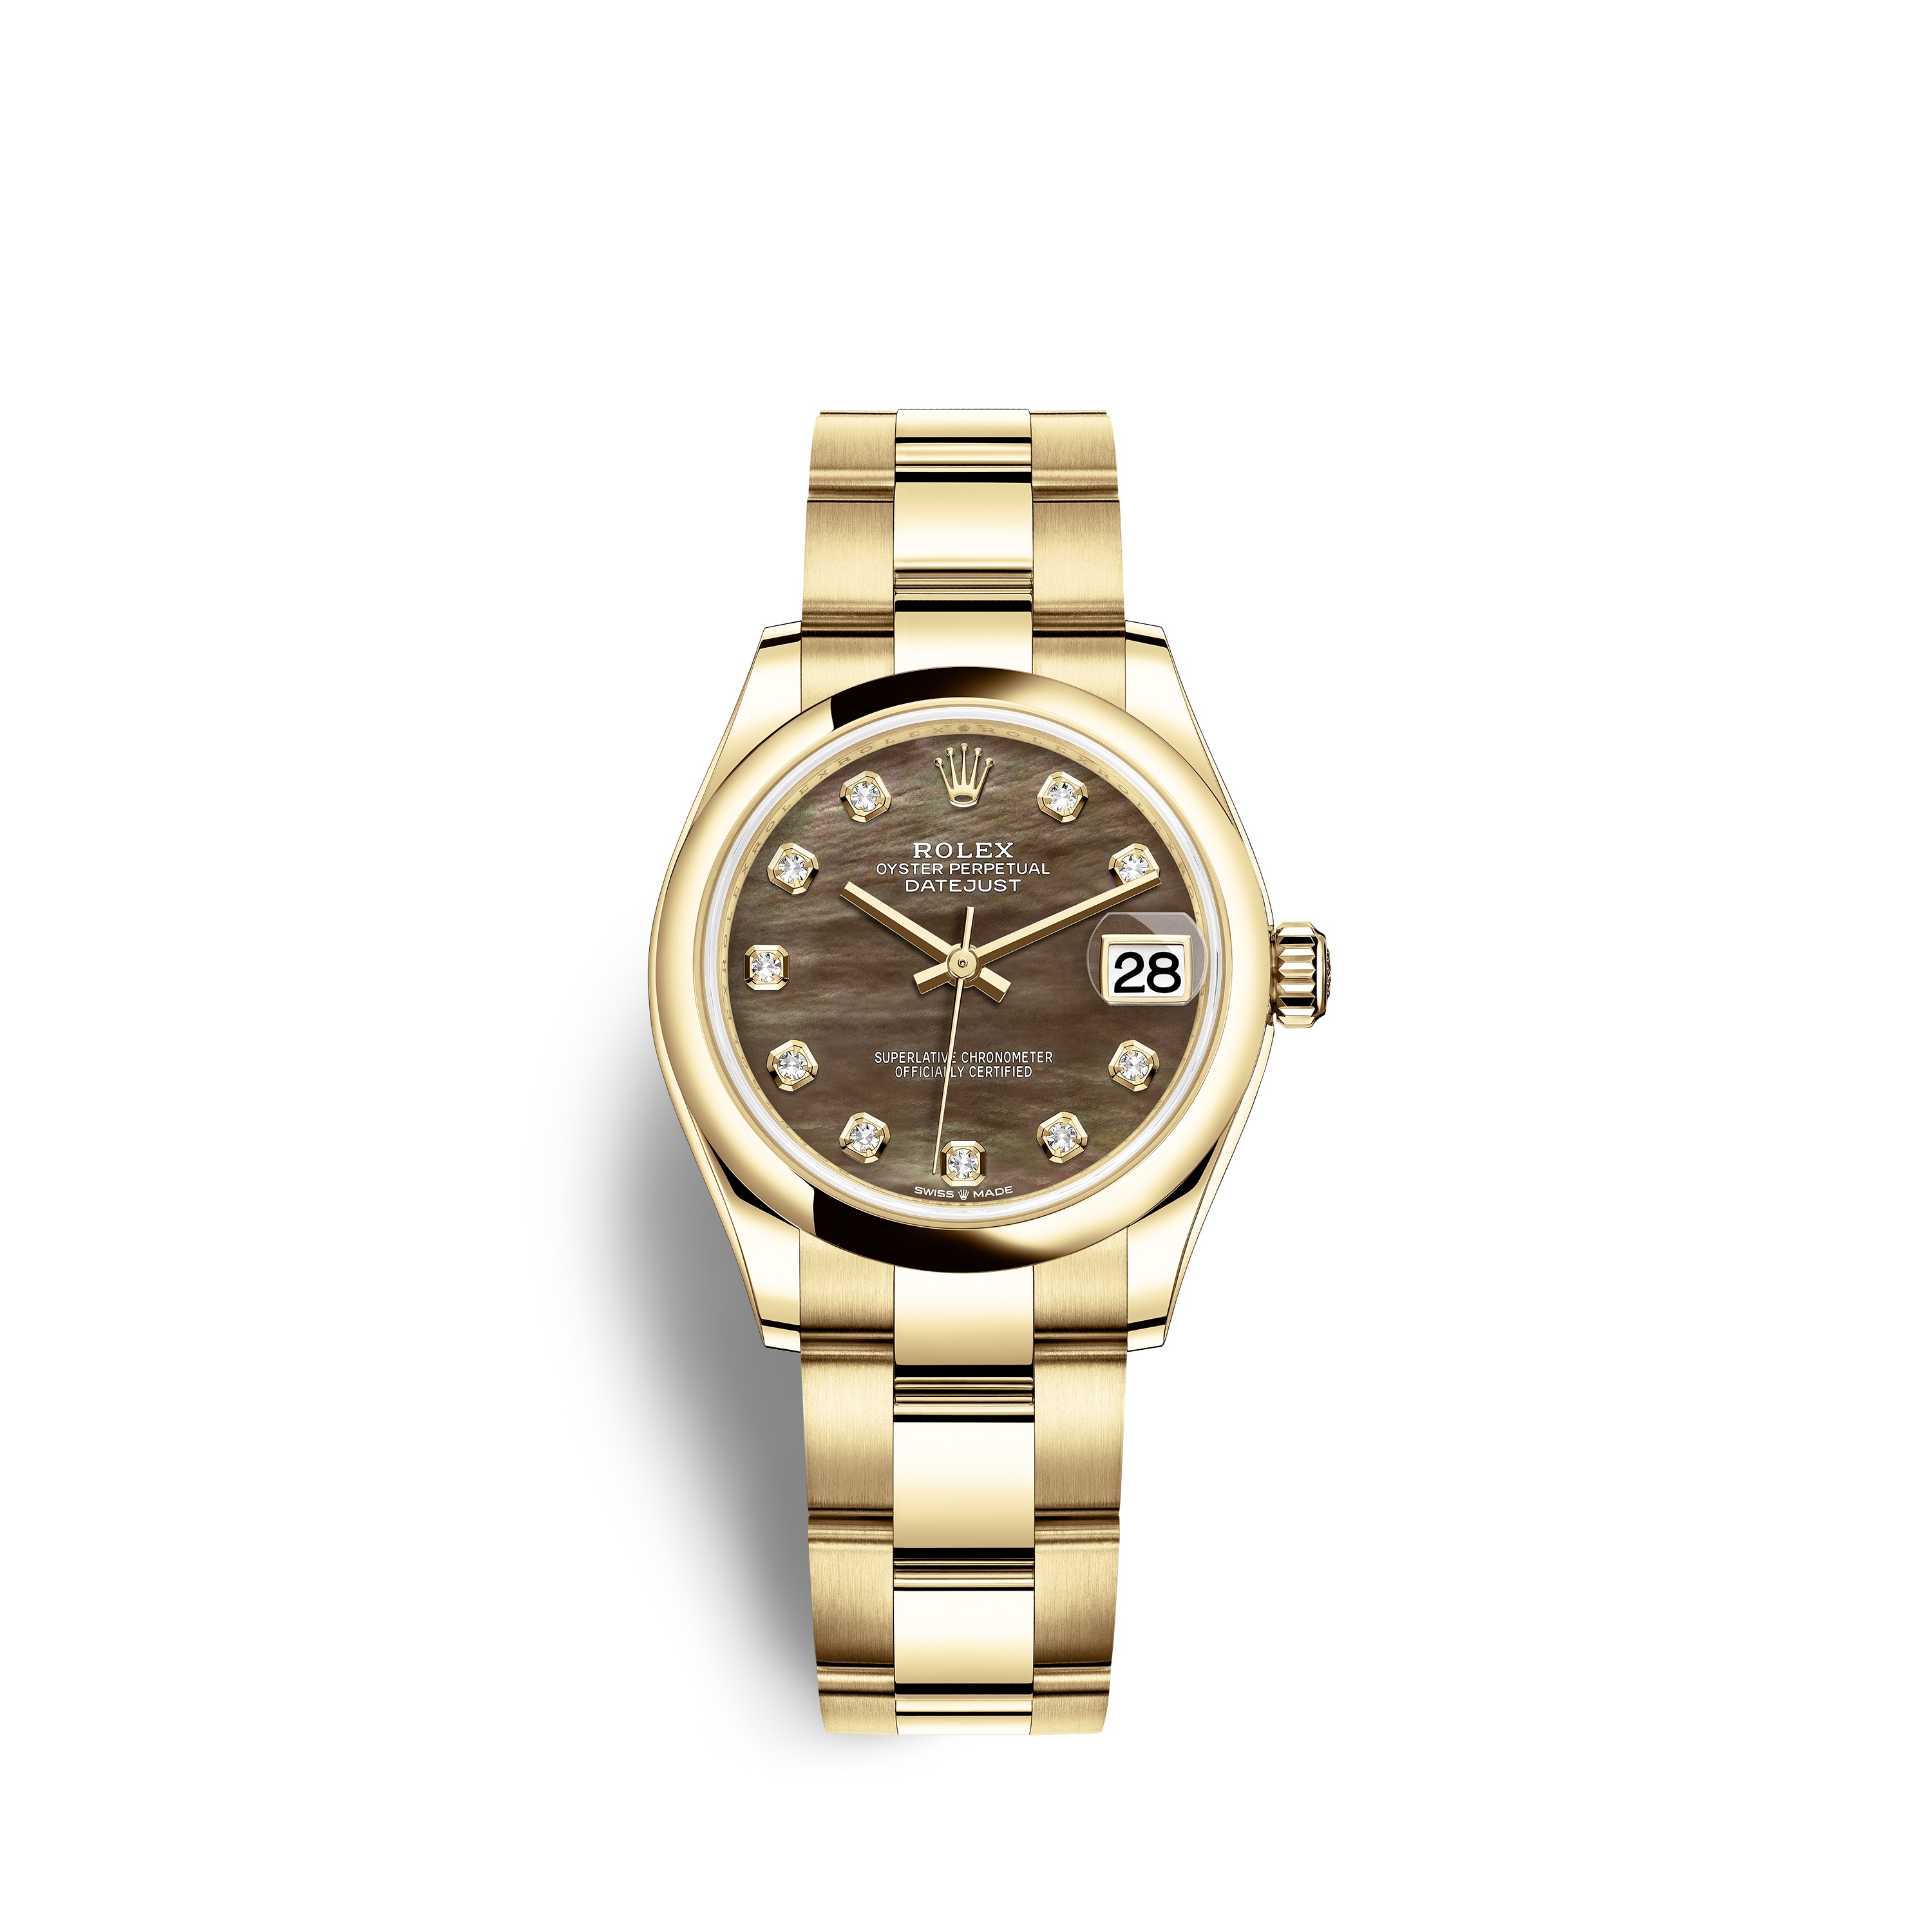 Datejust 31 278248 Gold Watch (Black Mother-of-Pearl Set with Diamonds)